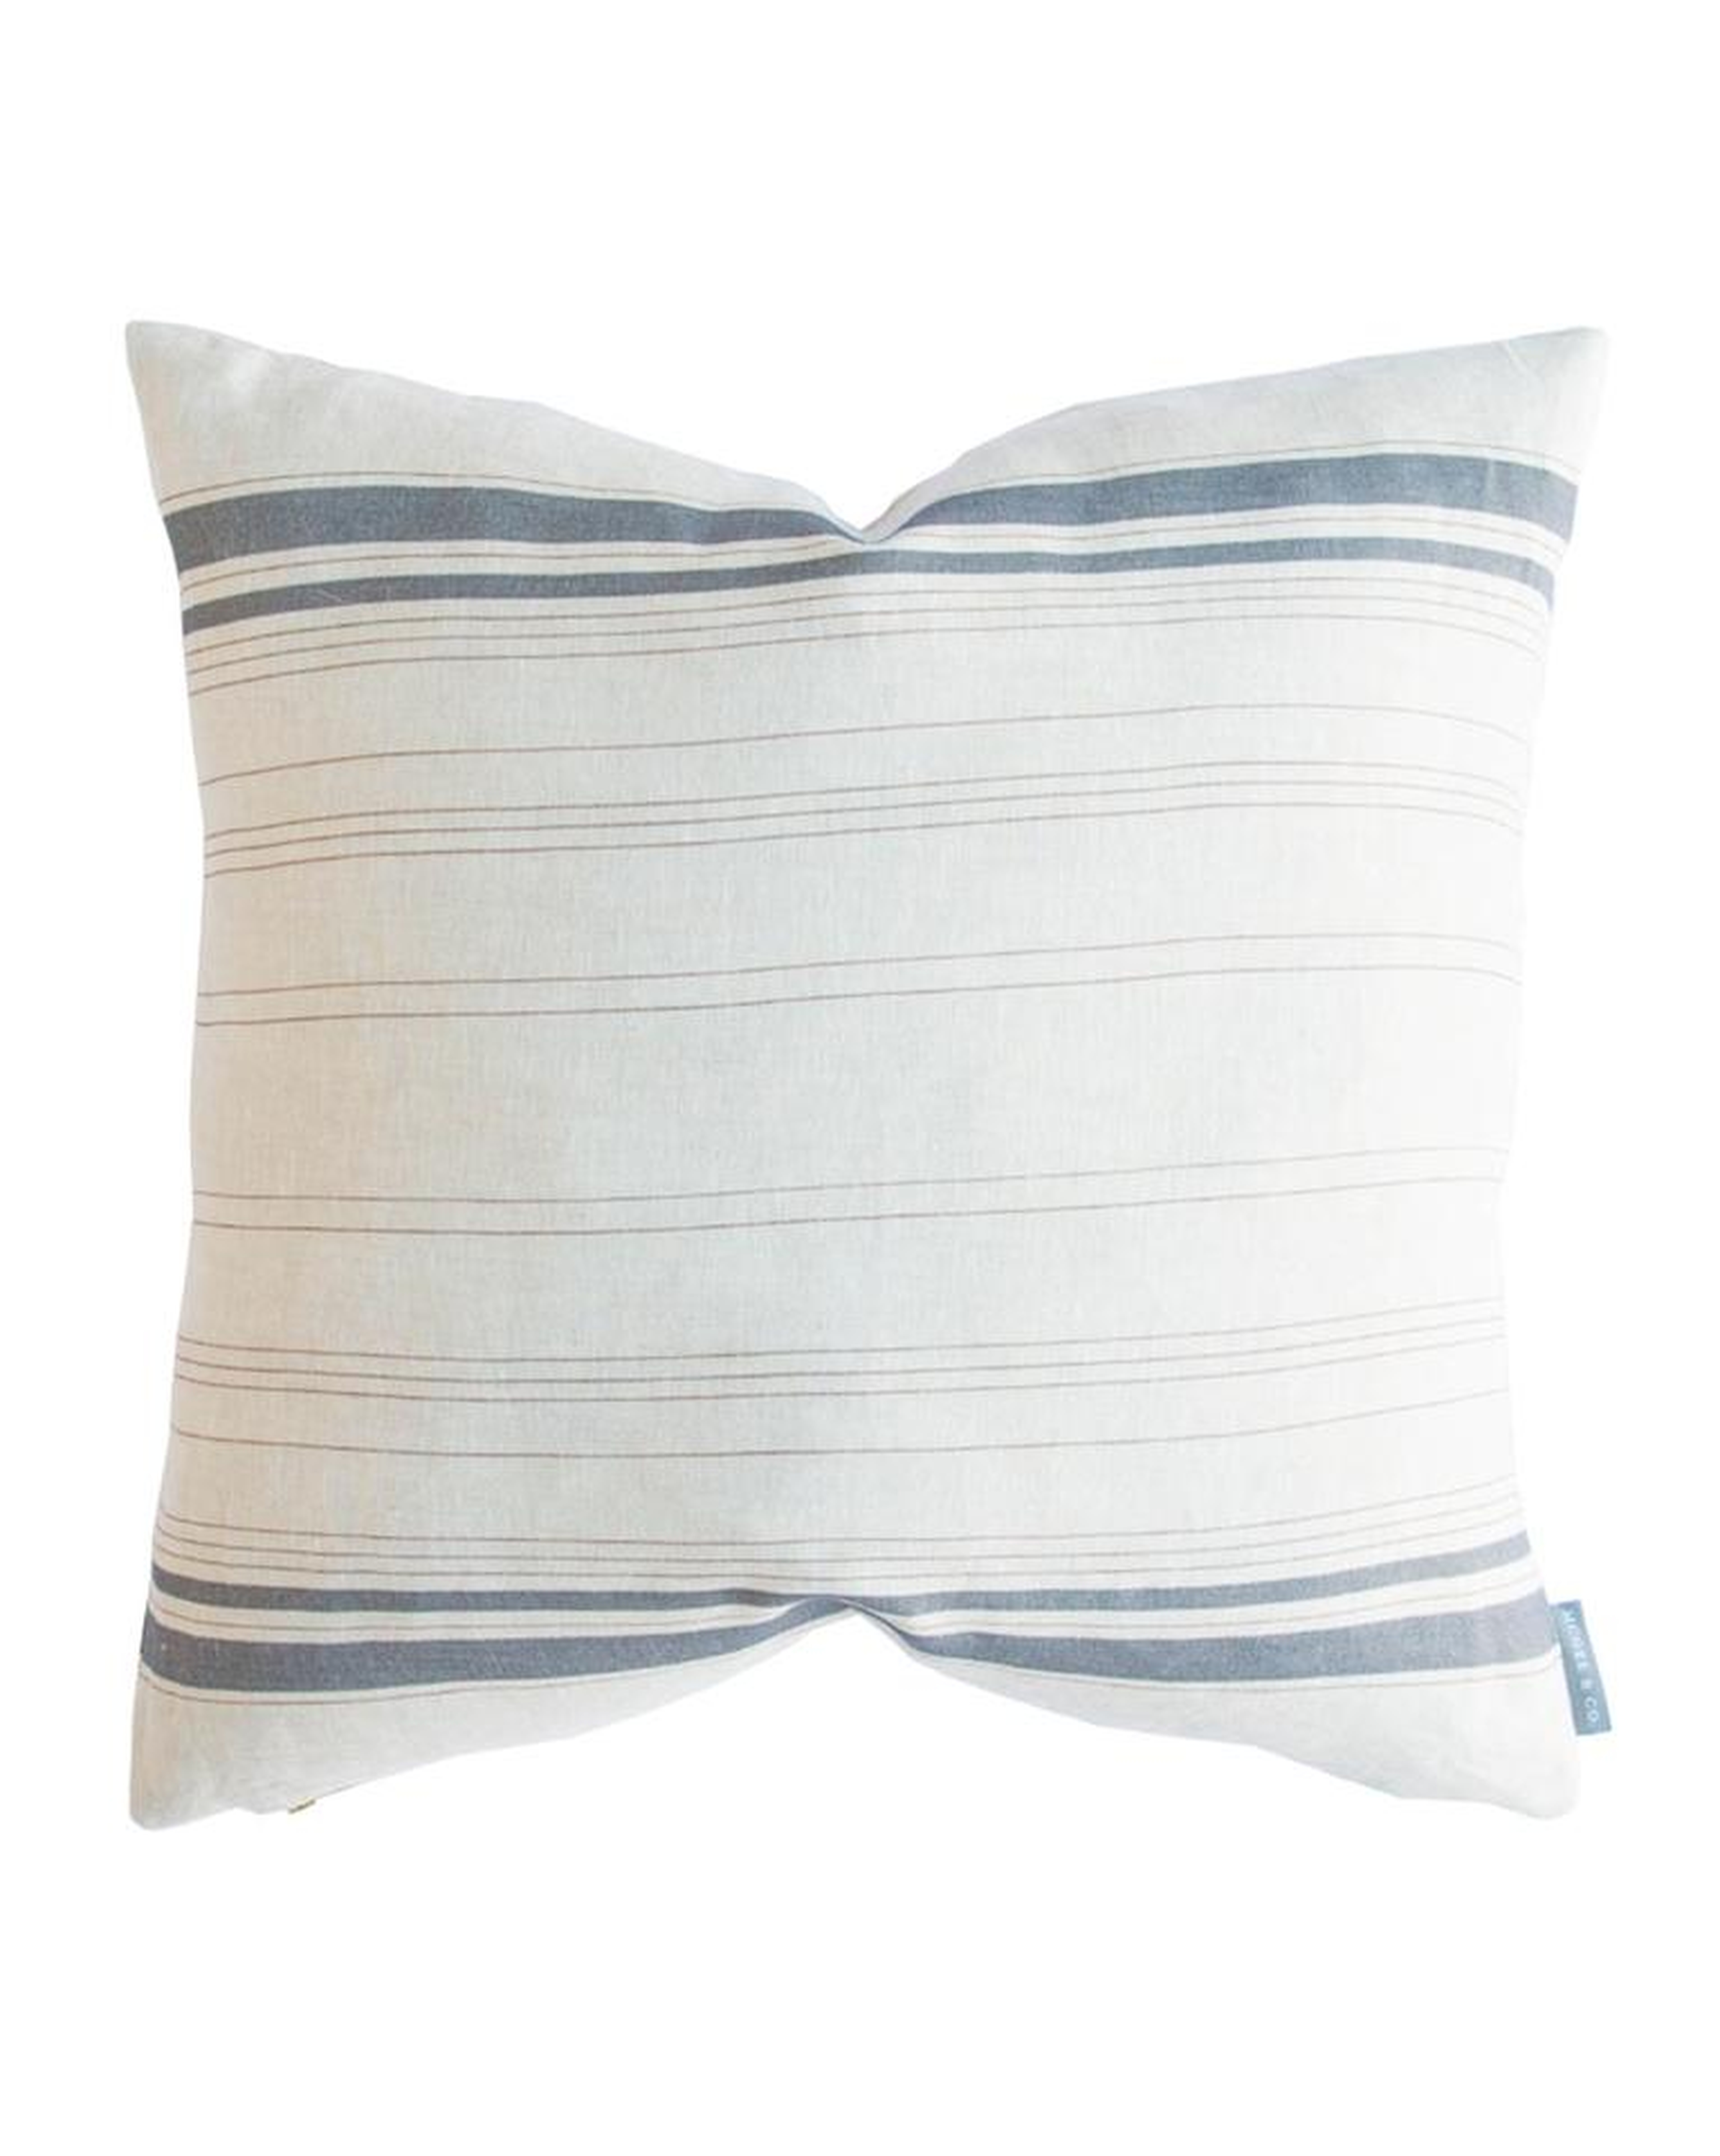 FRENCH STRIPE PILLOW COVER / 20"x20" - McGee & Co.